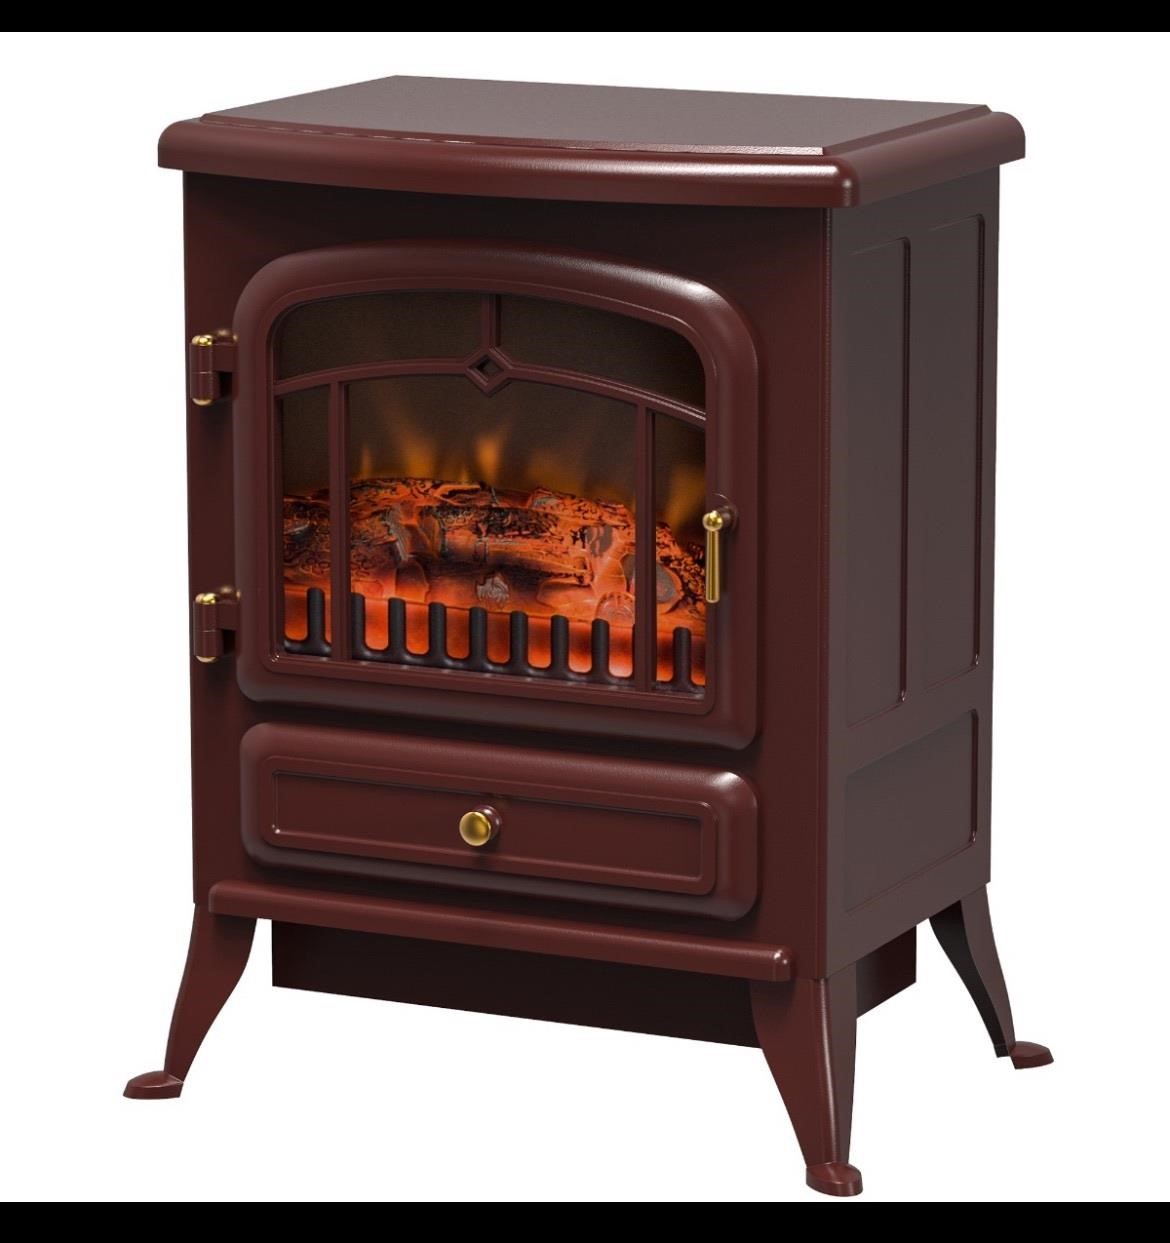 22" Electric Fireplace Heater